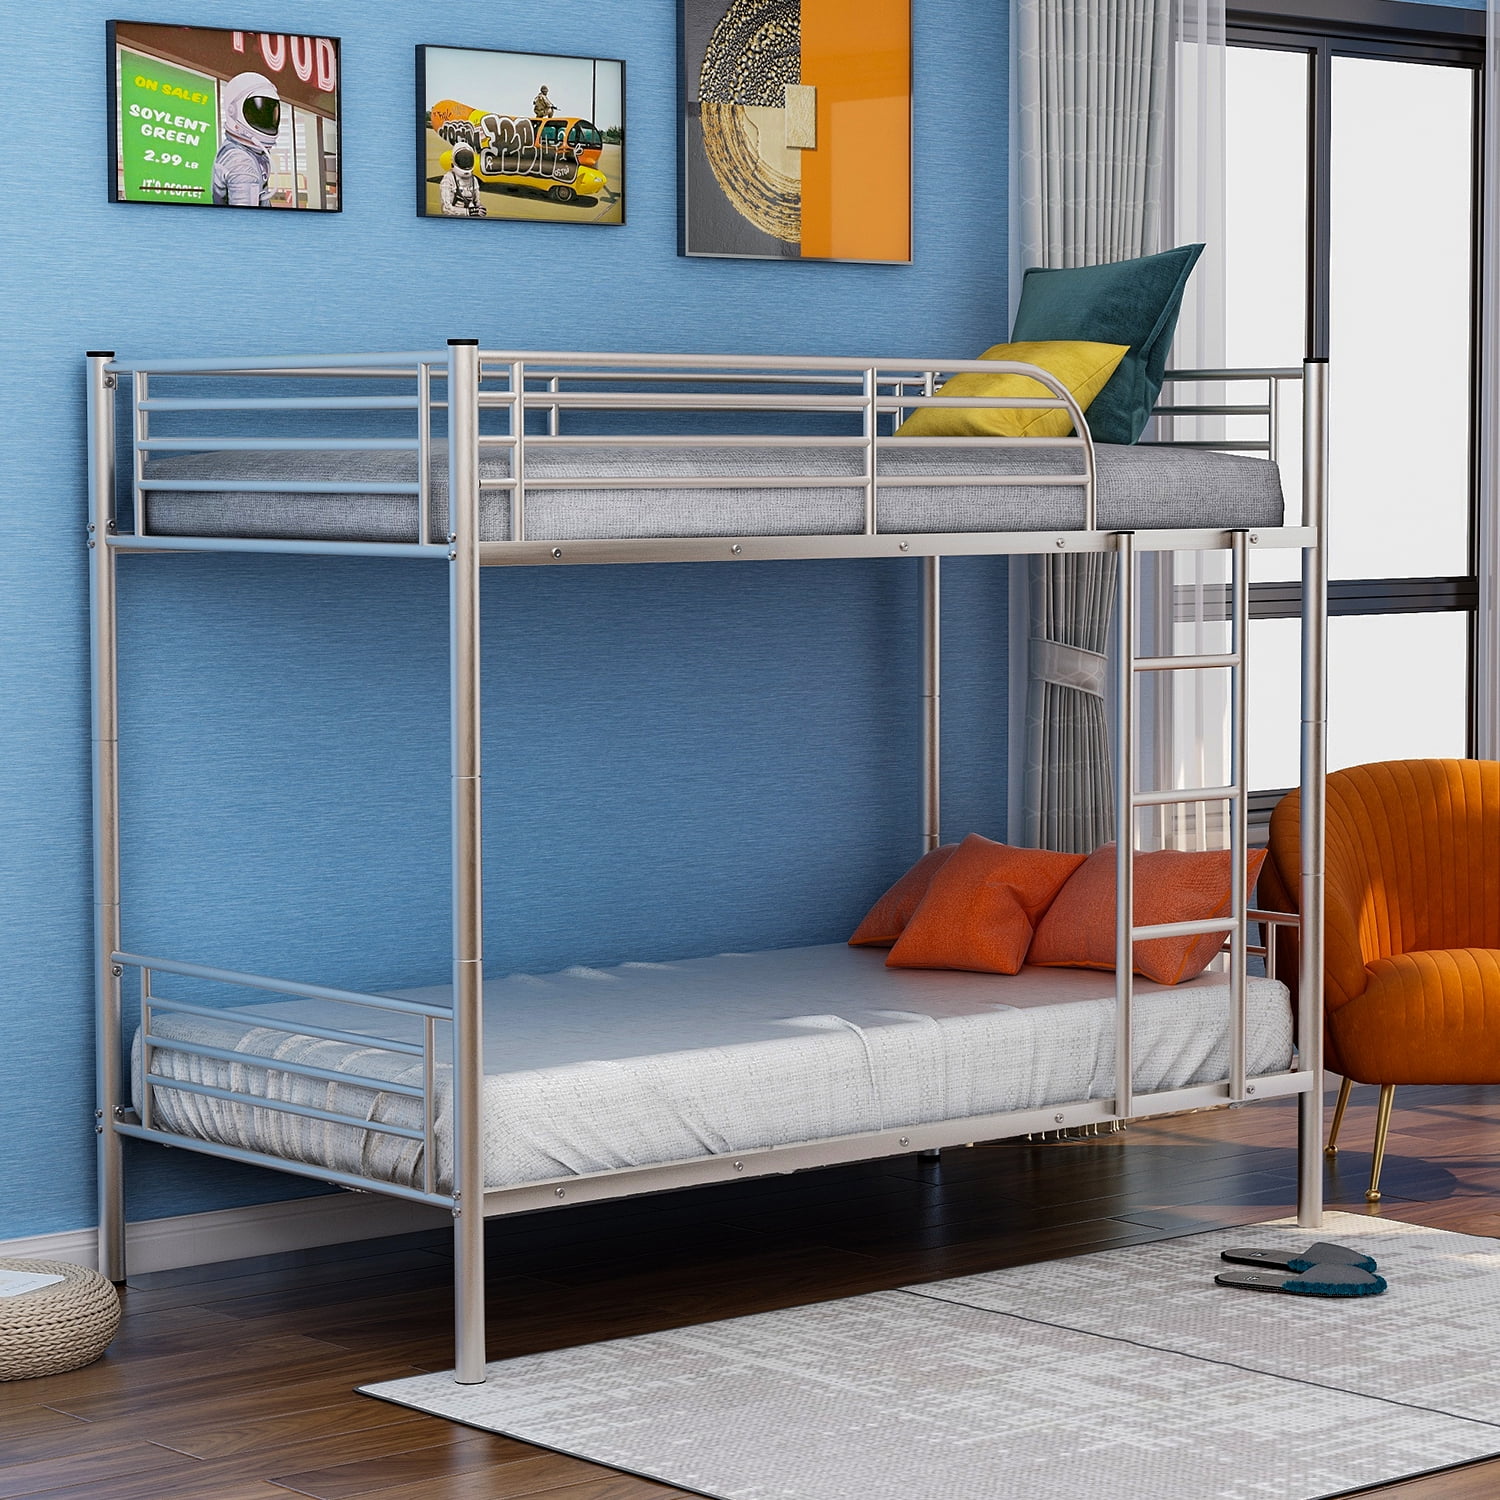 multiple bunk beds in a room